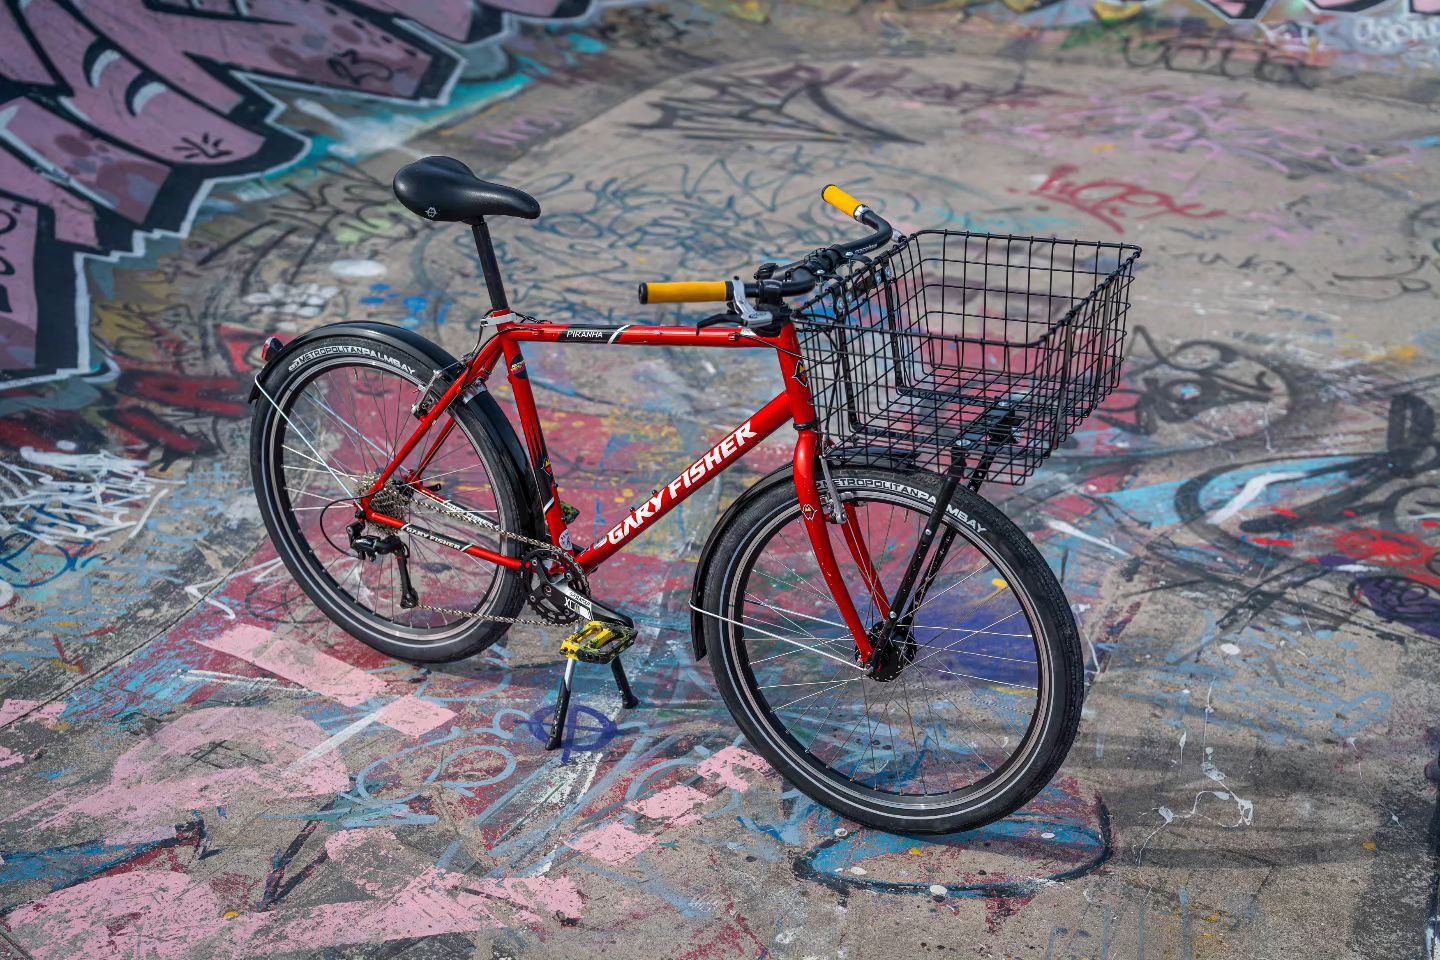 &quot;I didn't know they made 'em that big&quot; -DJ Daywalker

Basket Bikes do it for me. When I was a messenger I rode a Raleigh OneWay (steel sscx) with wide tires and a basket. This was at peak Aerospoke time and EVERYONE made fun of me for it an